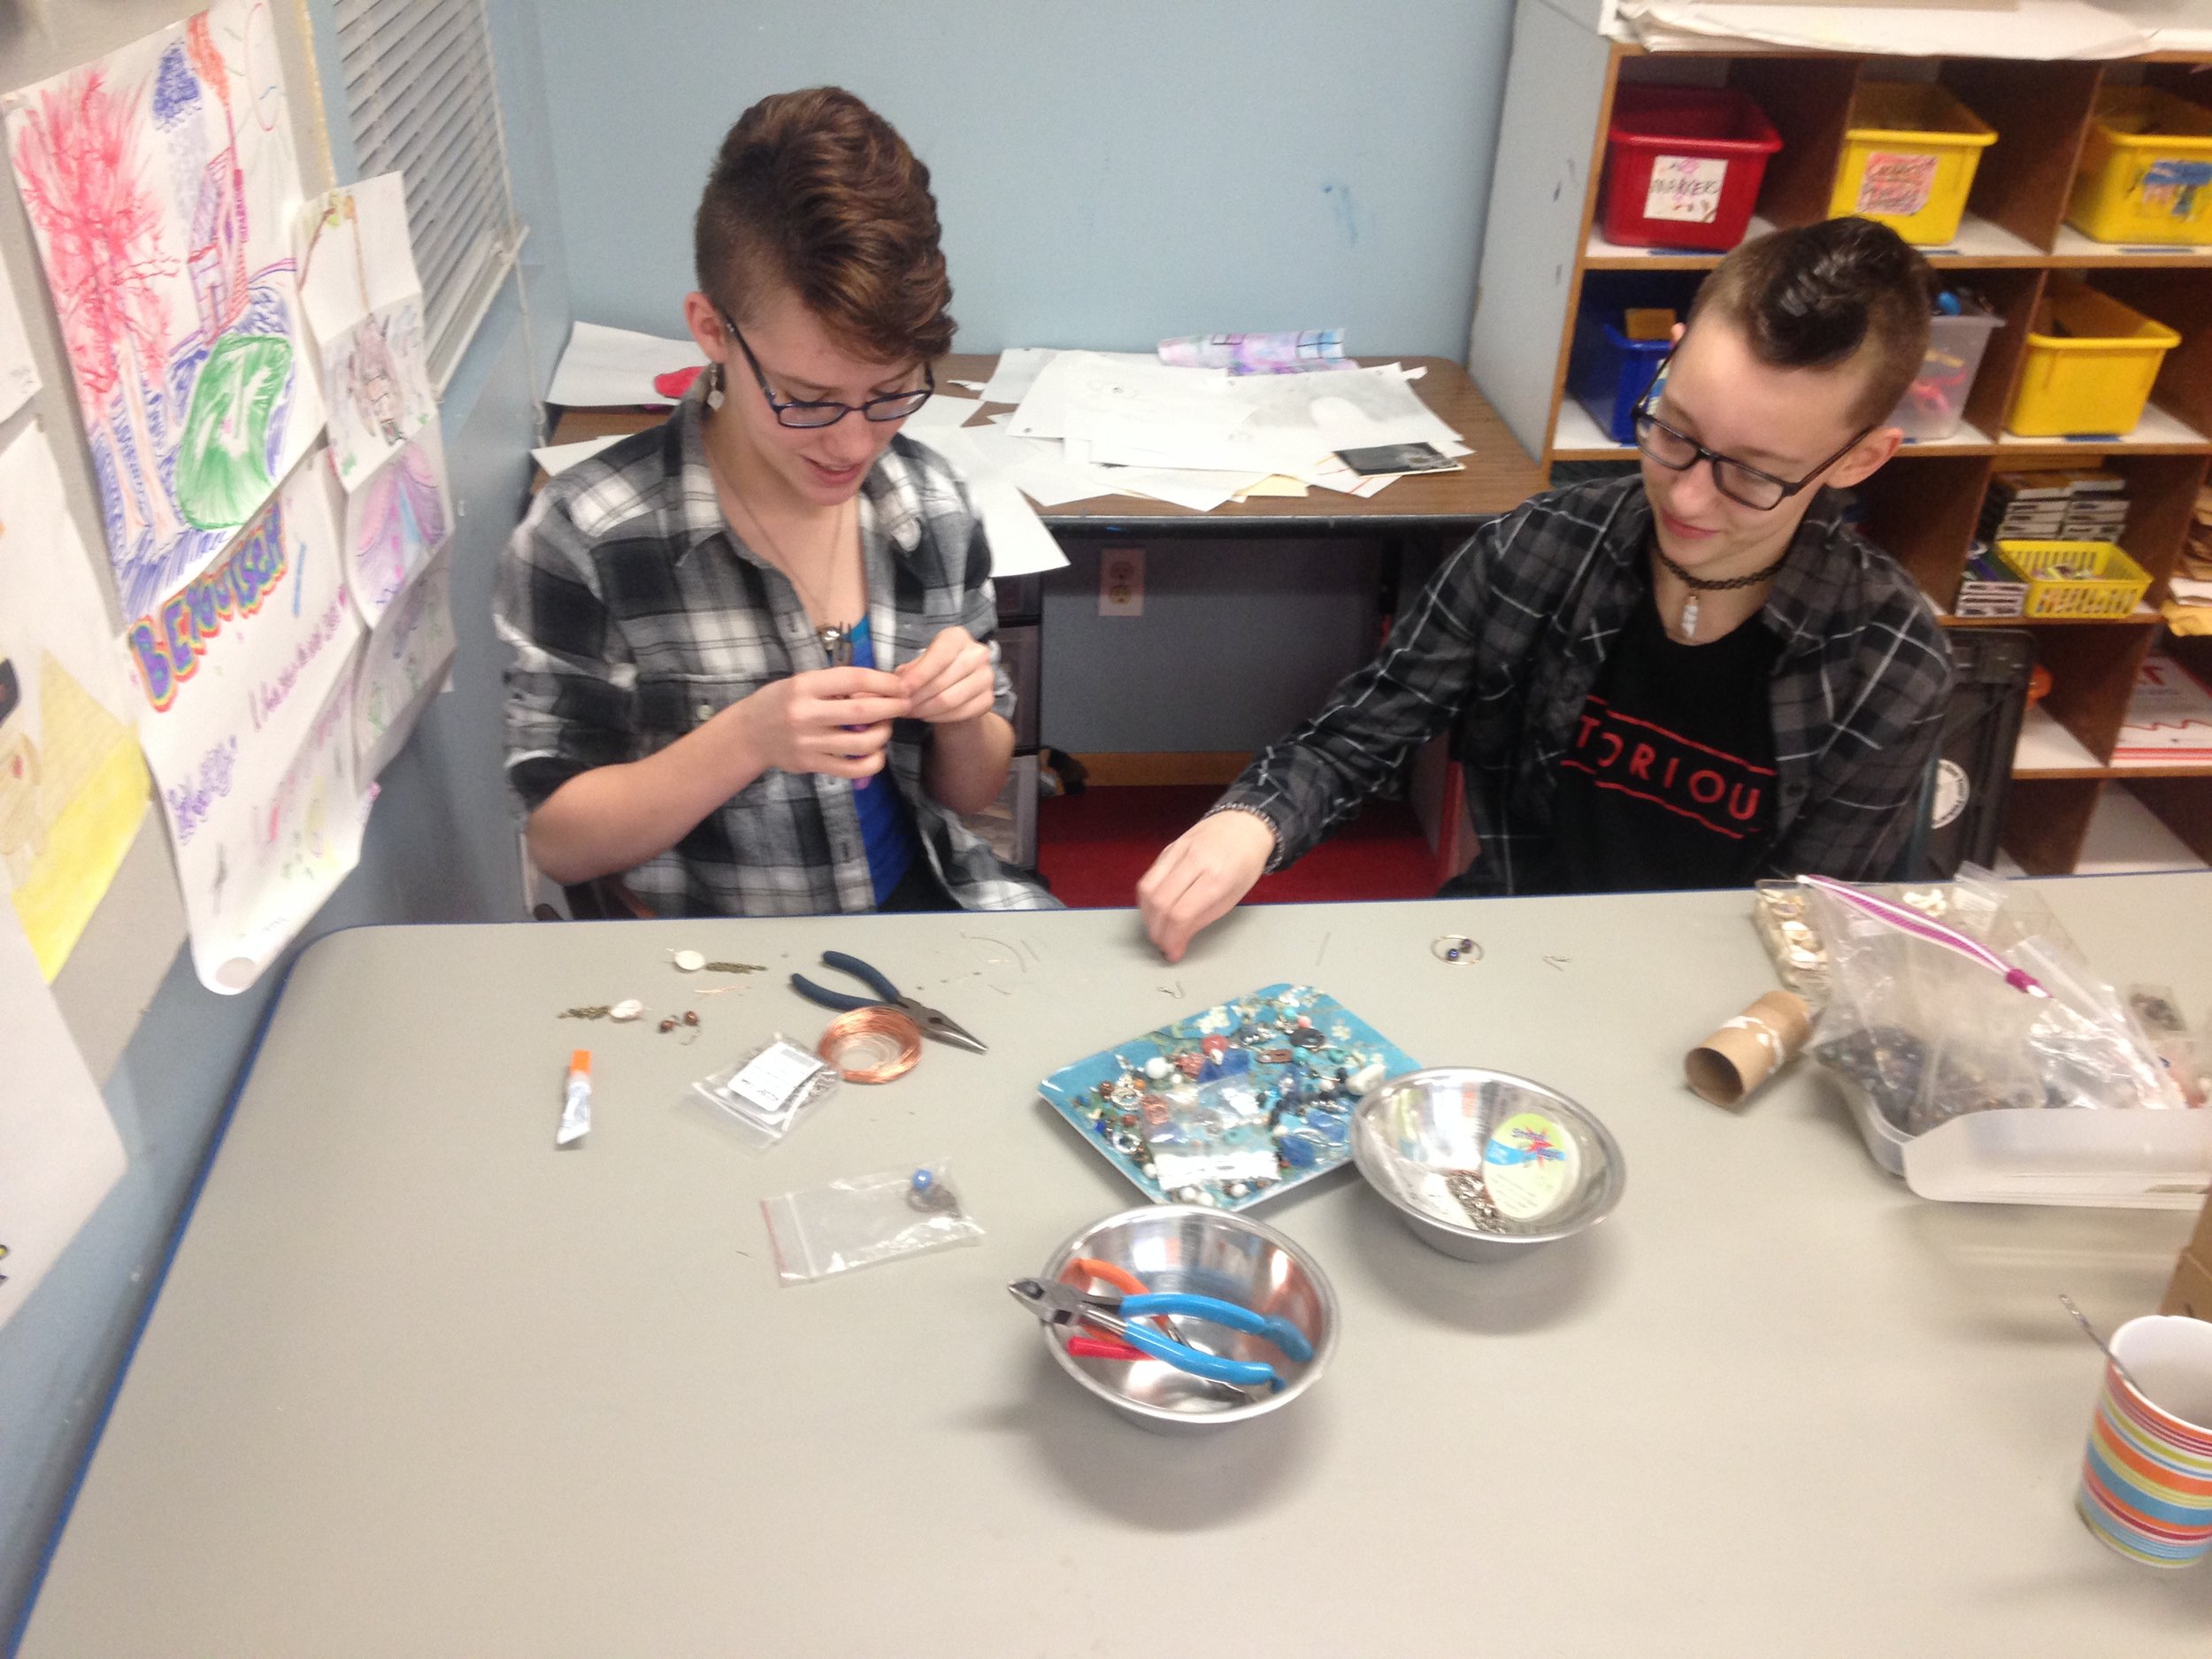 Two students doing crafts at a table with a variety of craft supplies.